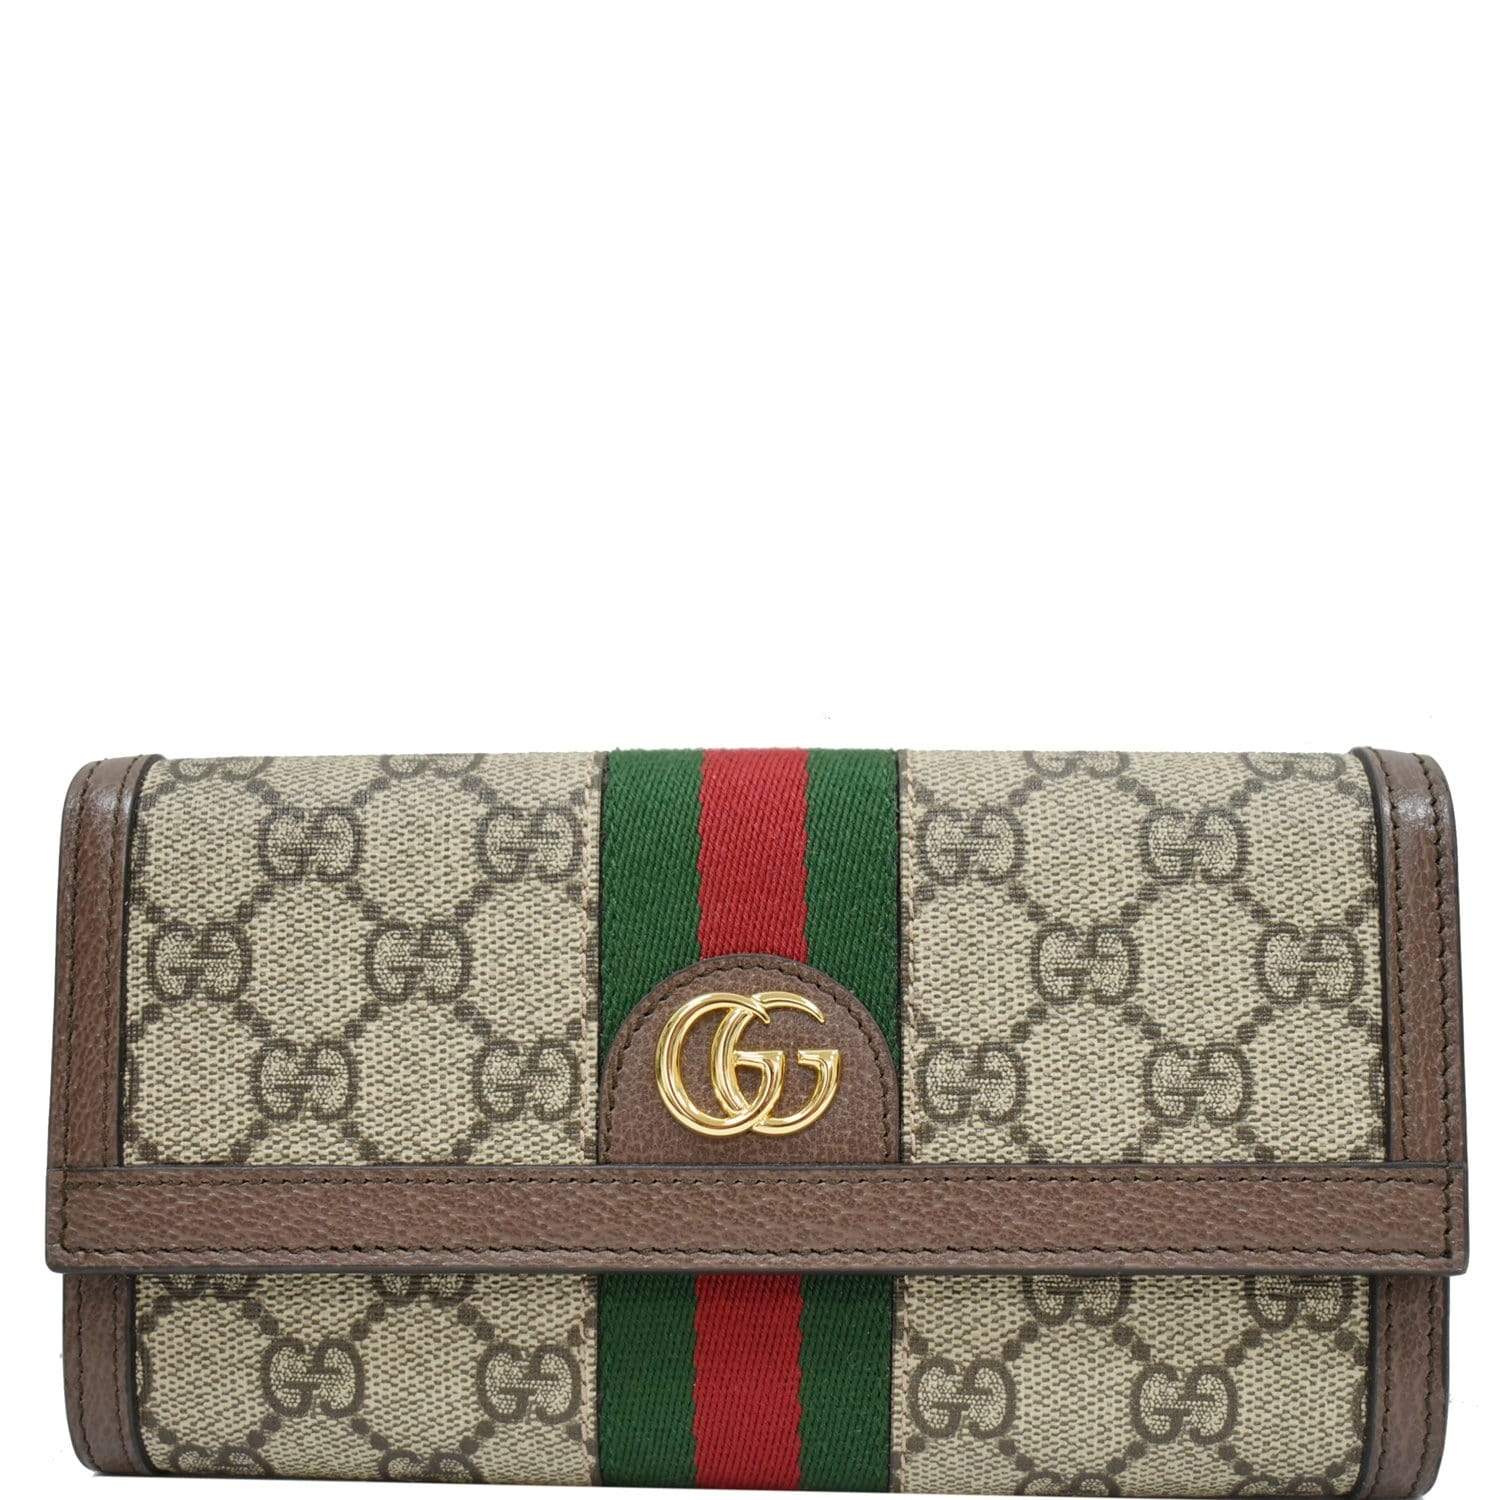 Authentic GUCCI Canvas Leather Continental Long Wallet 